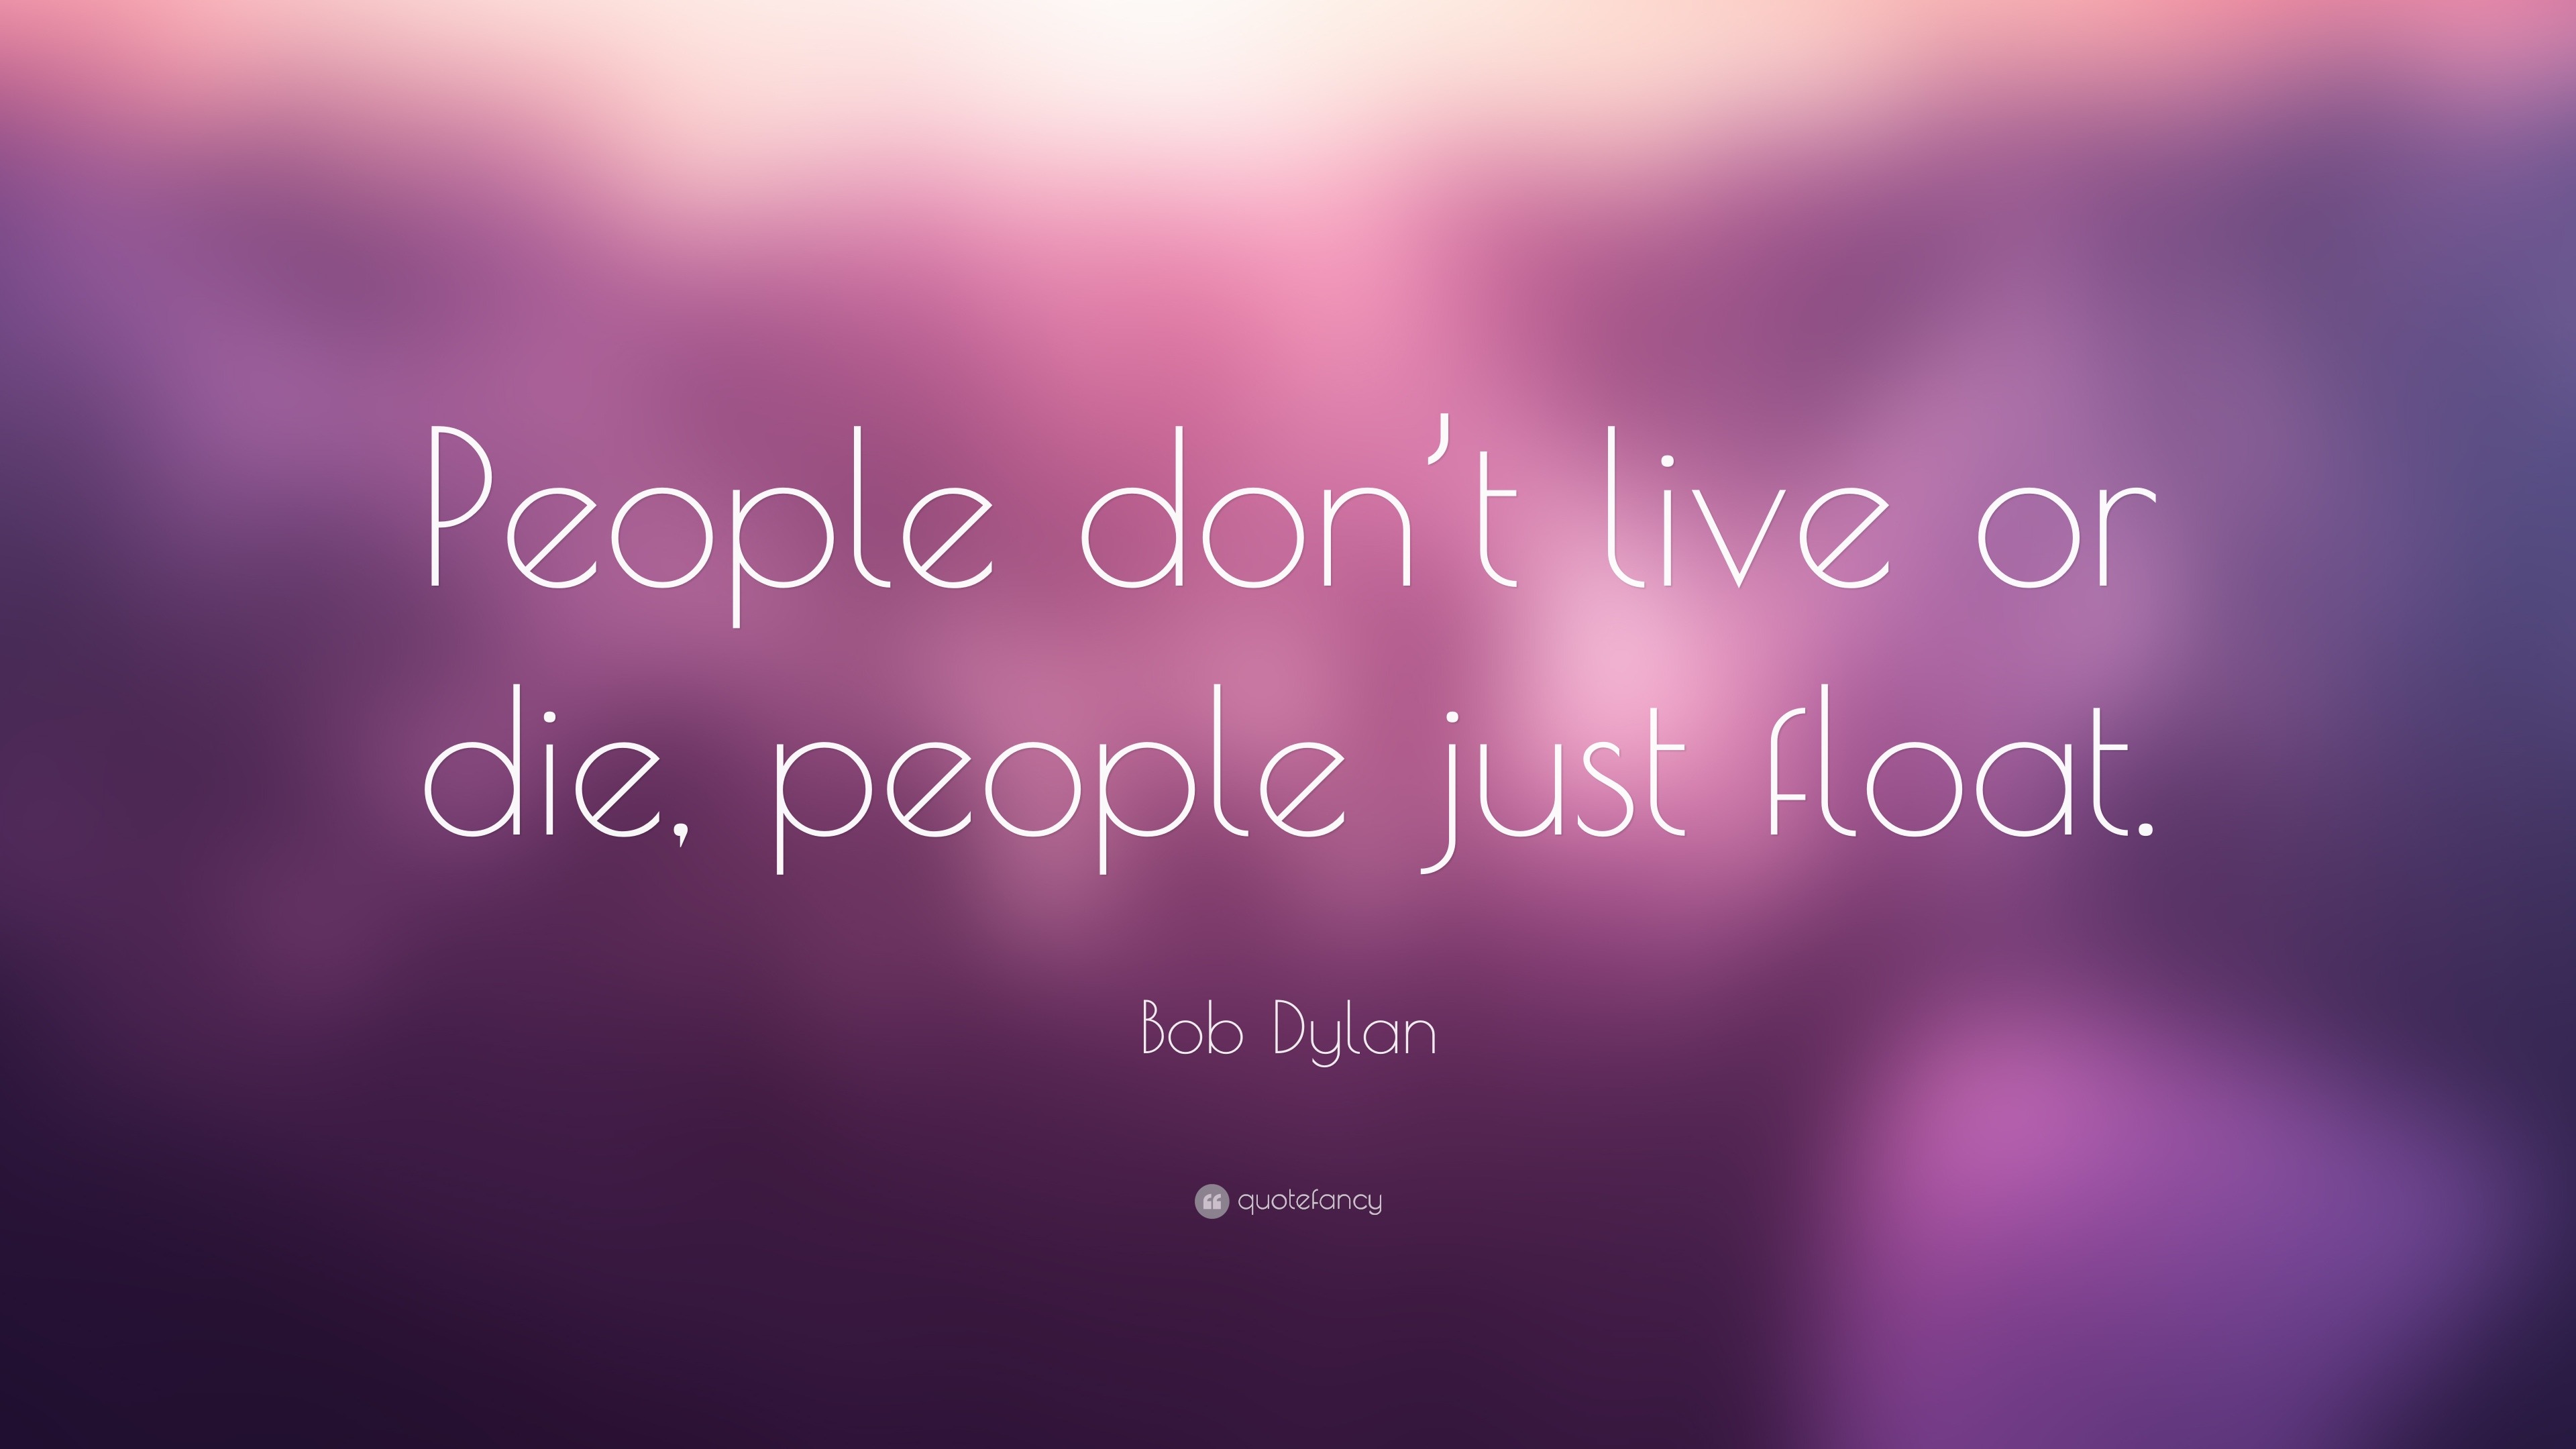 Bob Dylan Quote: “People don't live or die, people just float.”